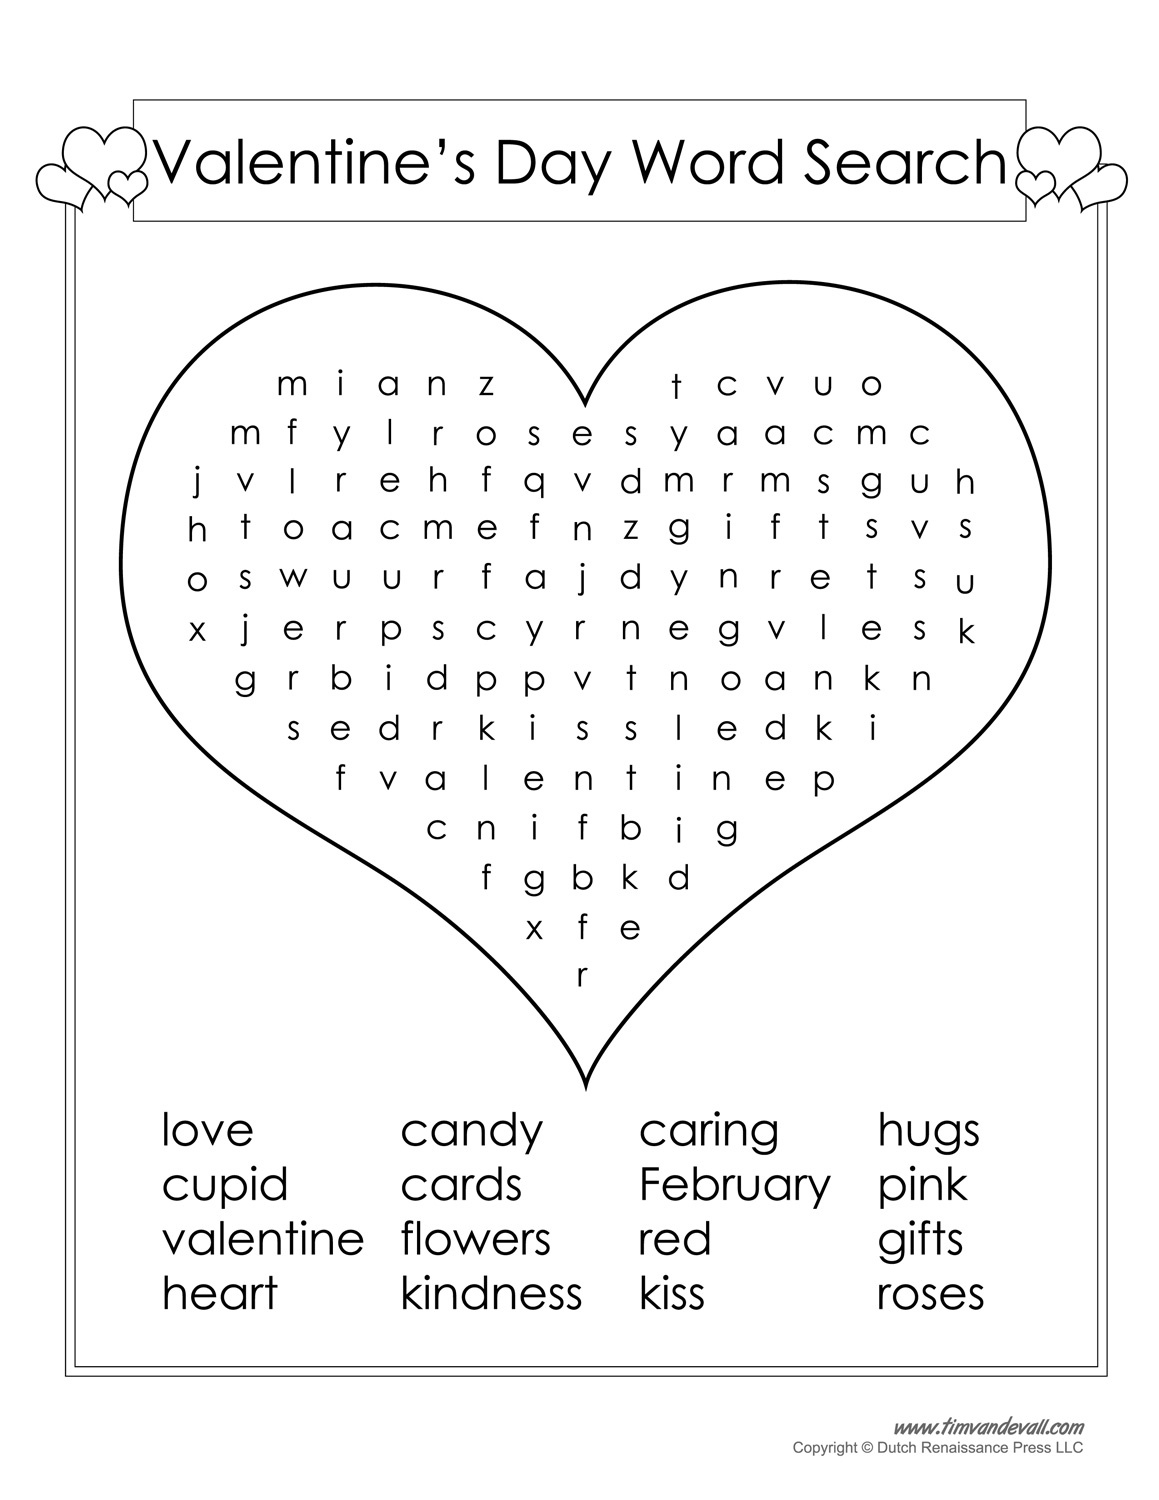 12 Valentine's Day Word Search | Kittybabylove - Free Printable Valentine Word Search For Adults